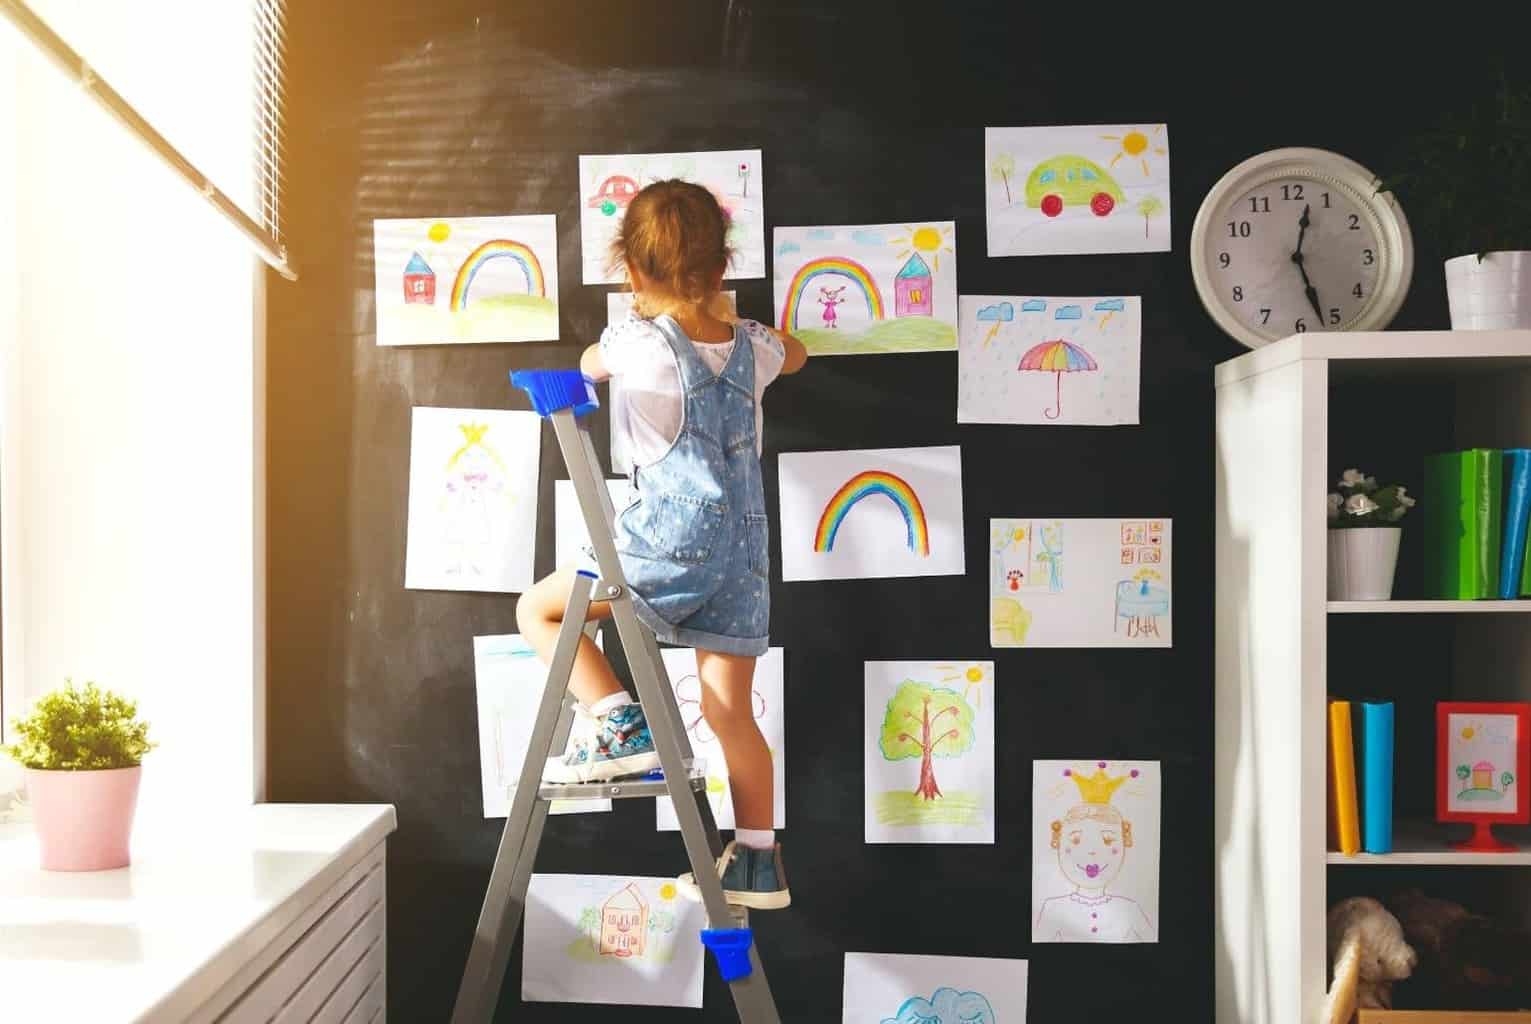 Kids Art Storage: What Can I Do with My Child's Artwork?